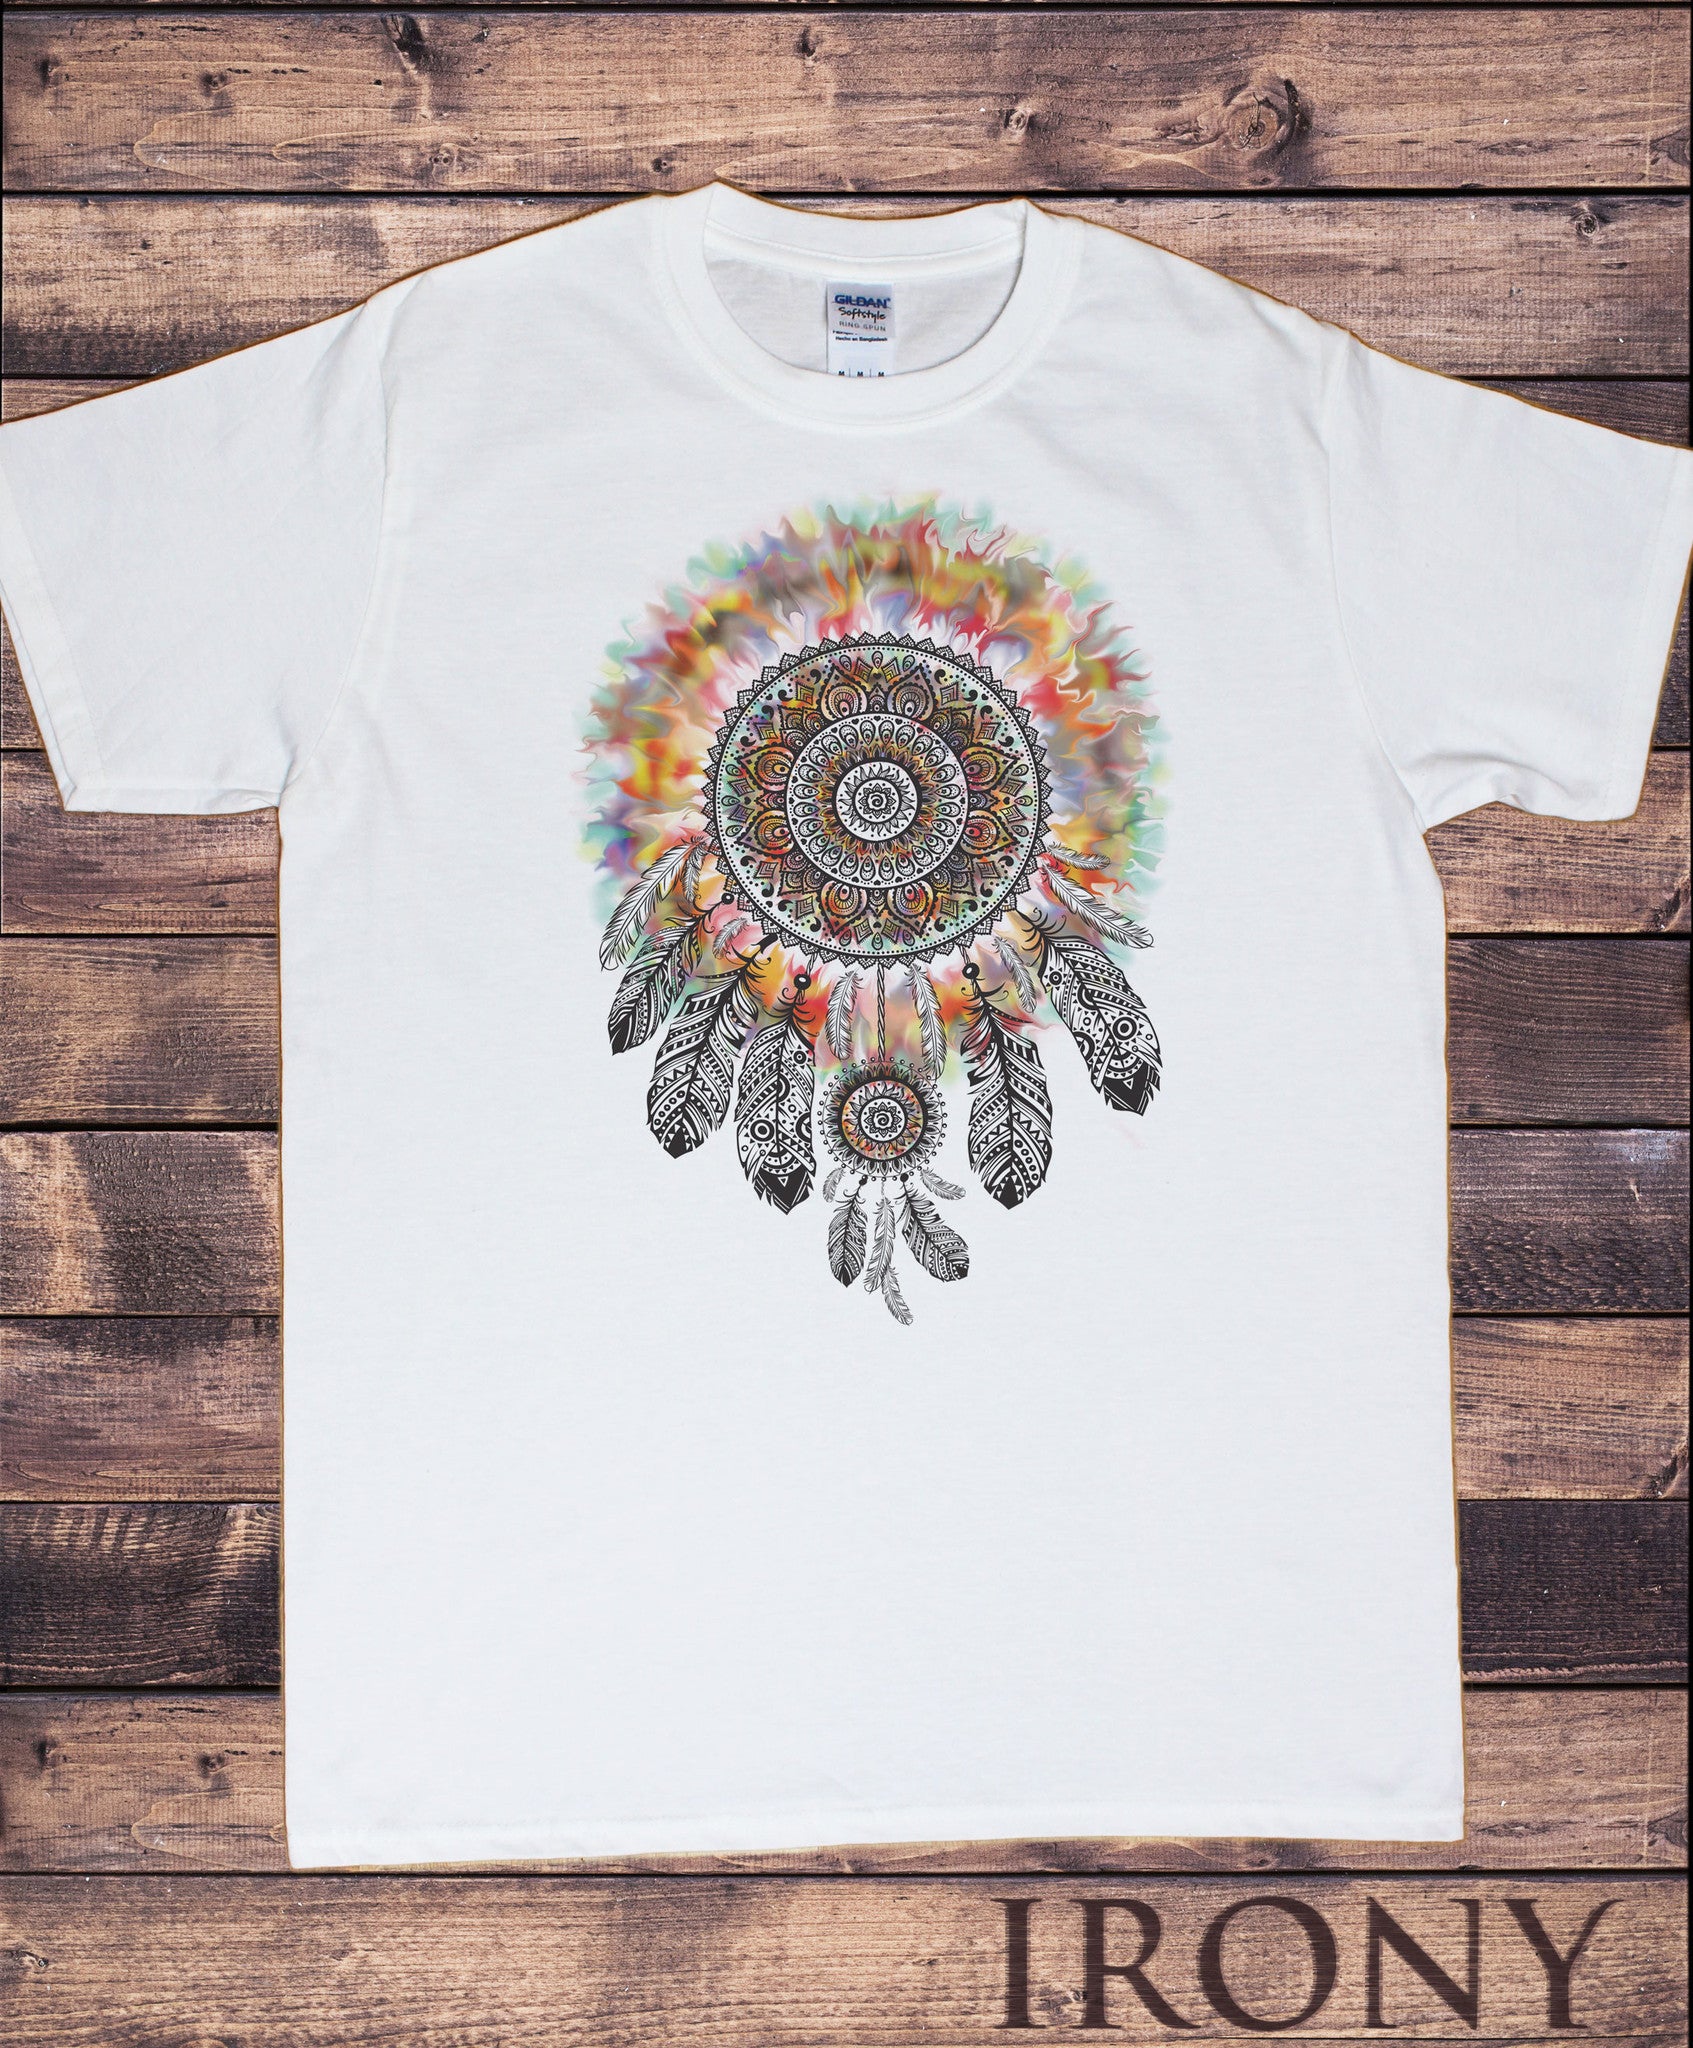 Mere Godkendelse Necessities Men's White T-Shirt Tribal Red Indian Native American Feathers Culture  Novelty Tie Dye Print TSO12